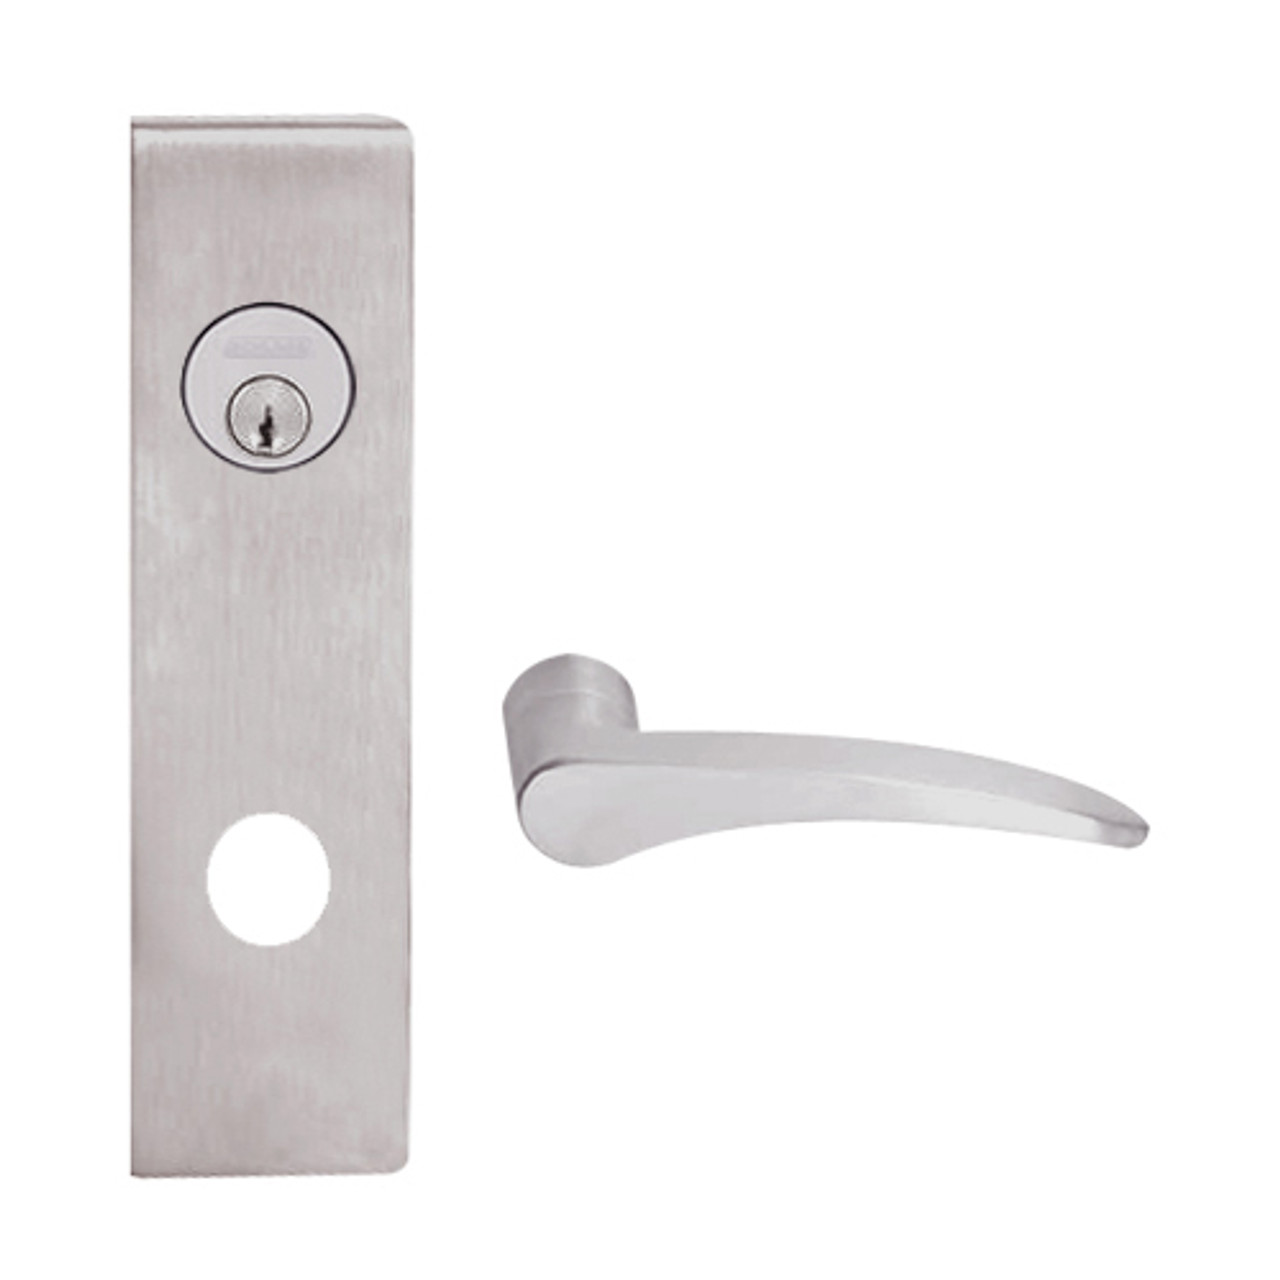 L9453L-12N-630-RH Schlage L Series Less Cylinder Entrance with Deadbolt Commercial Mortise Lock with 12 Cast Lever Design in Satin Stainless Steel